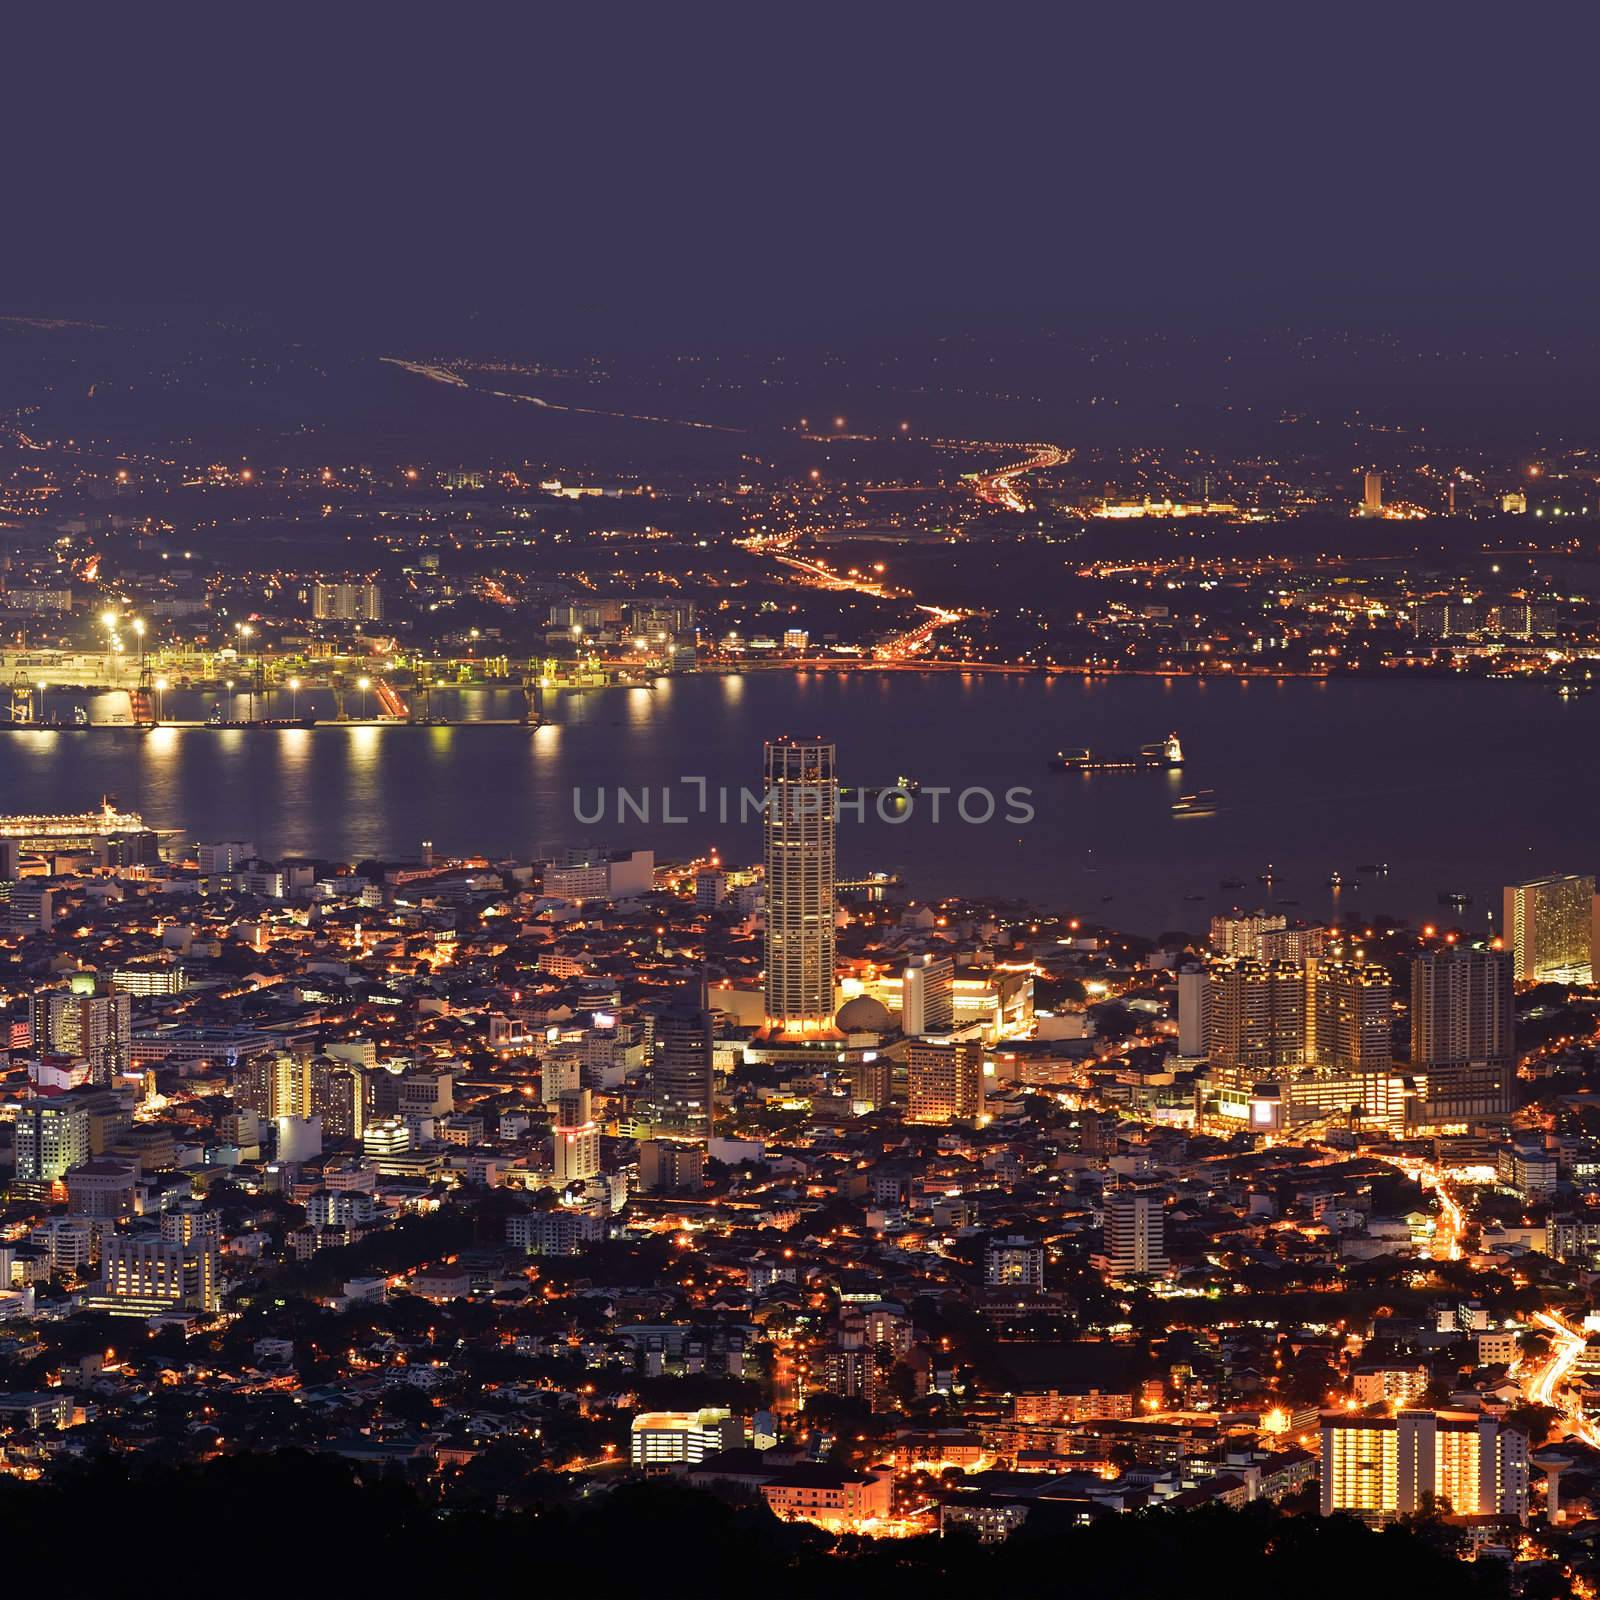 City night scene of harbor and tower in Penang, Malaysia, Asia.